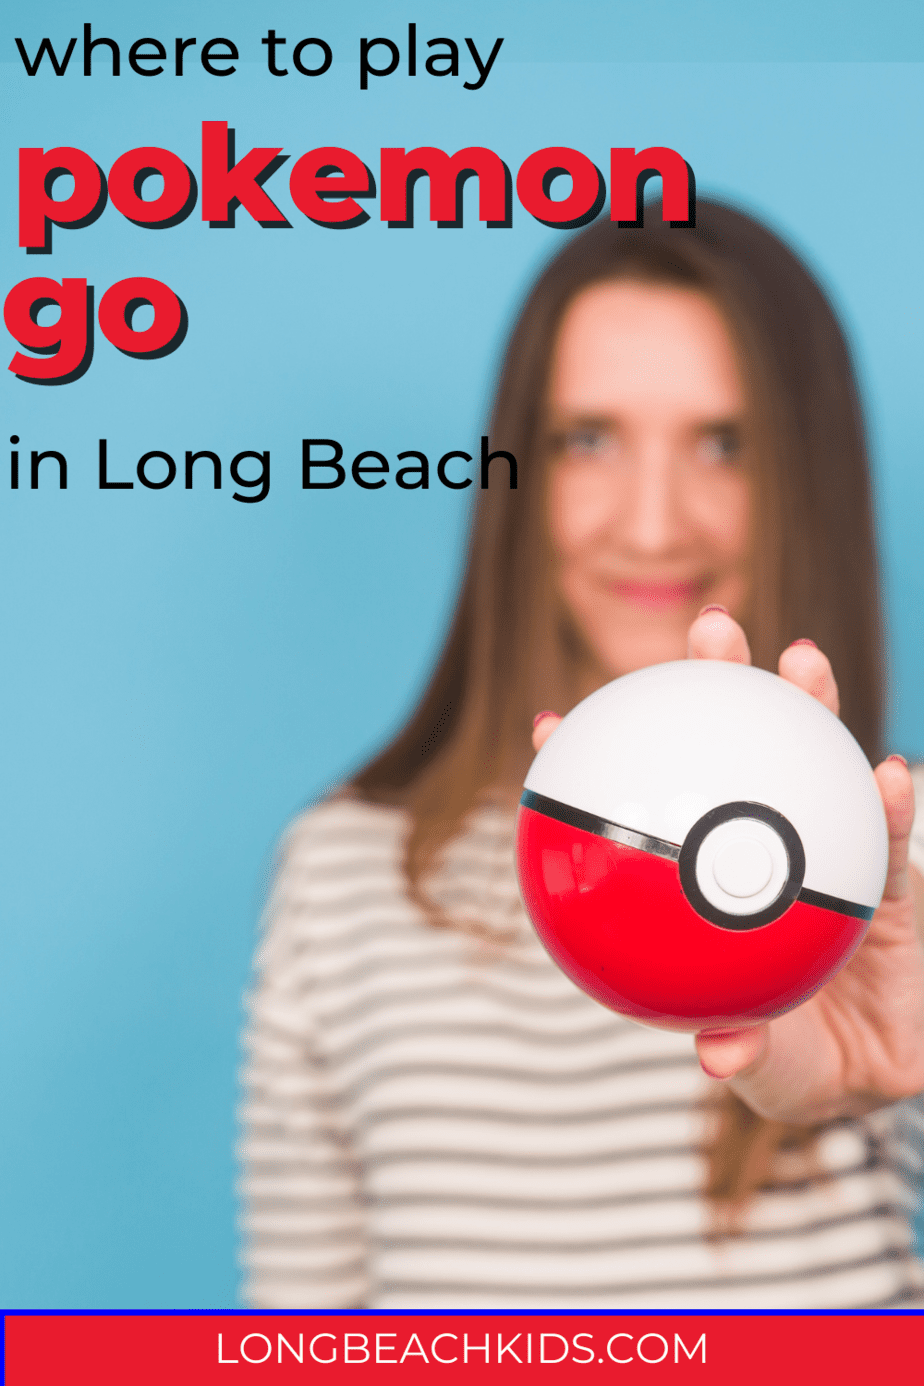 woman with pokeball; text: where to play pokemon go in long beach